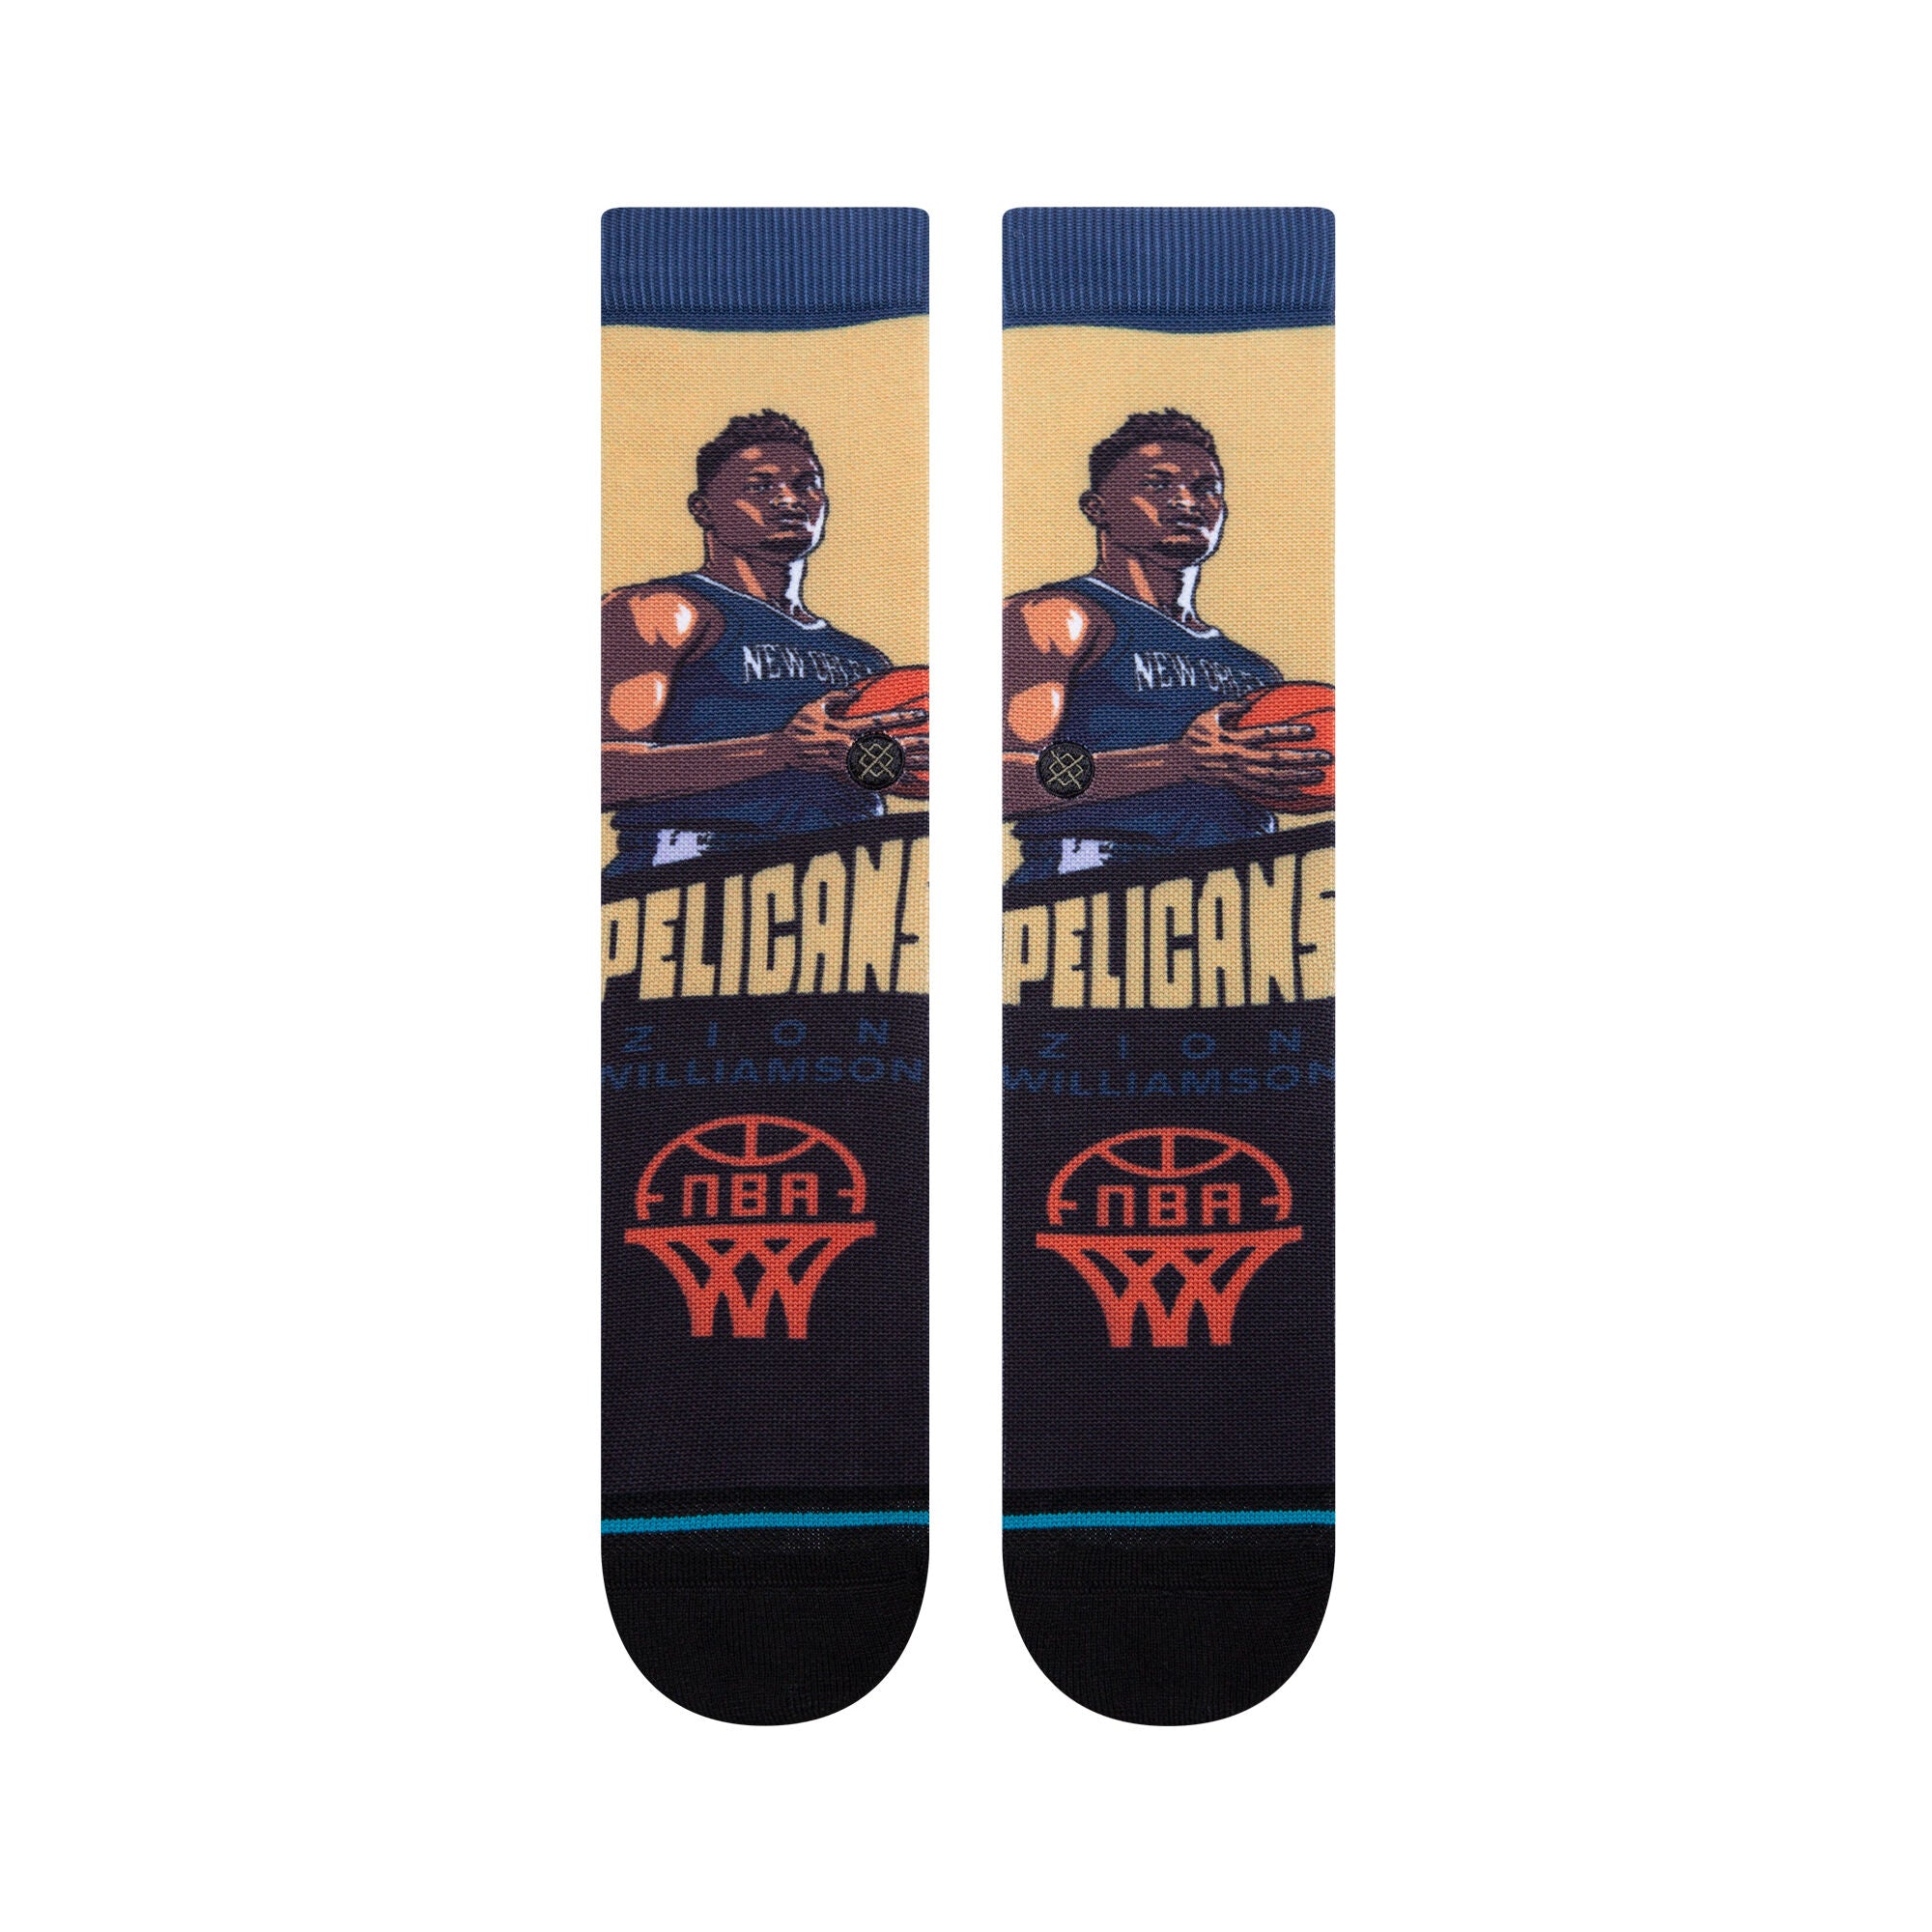 Stance Graded Zion